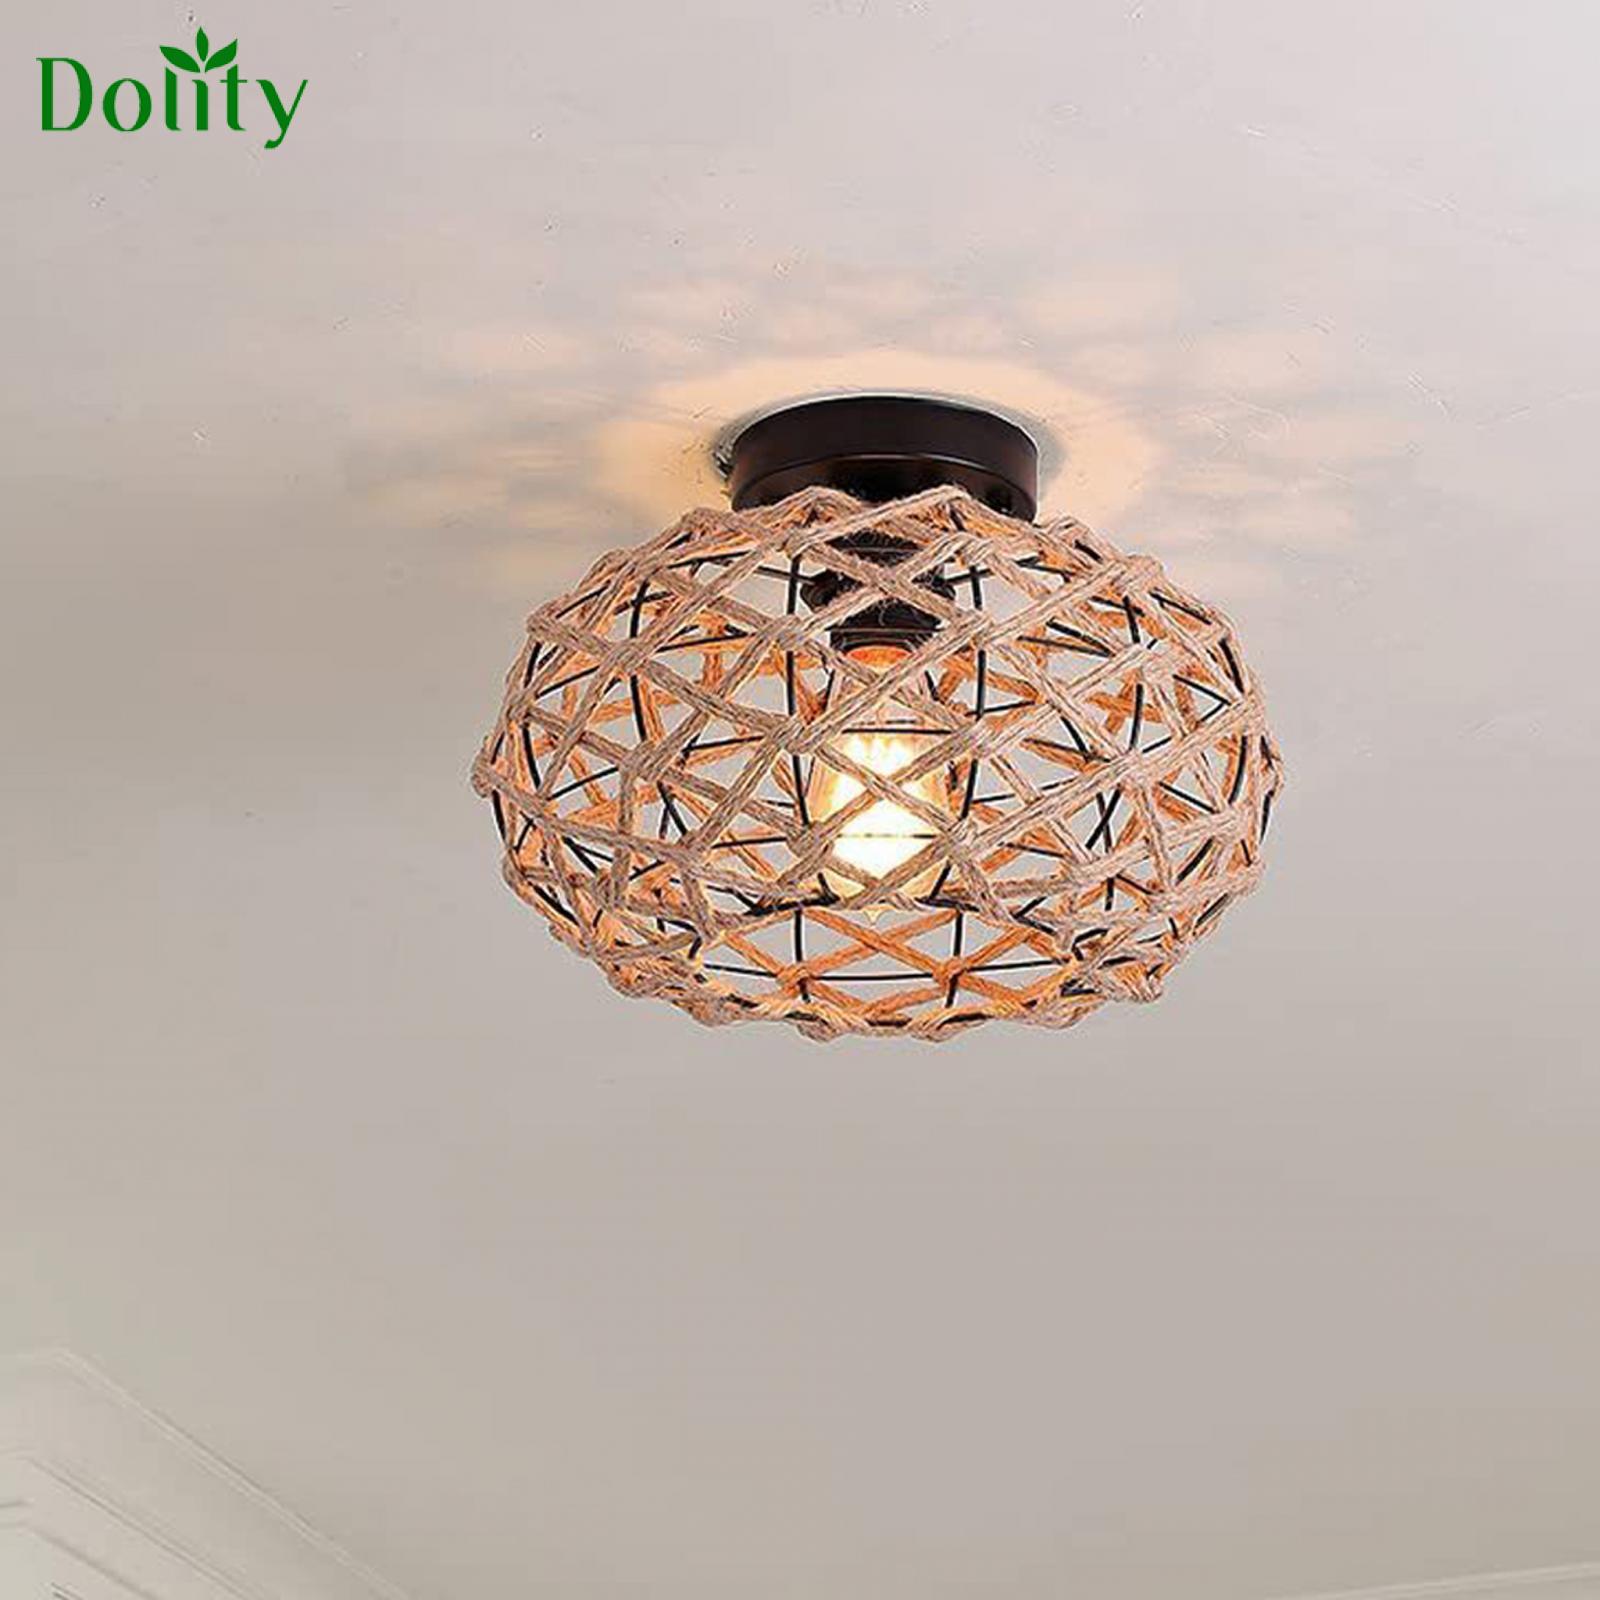 Dolity Woven Lampshade Handwoven Bulb Guard Metal Bulb Cage for Cafe